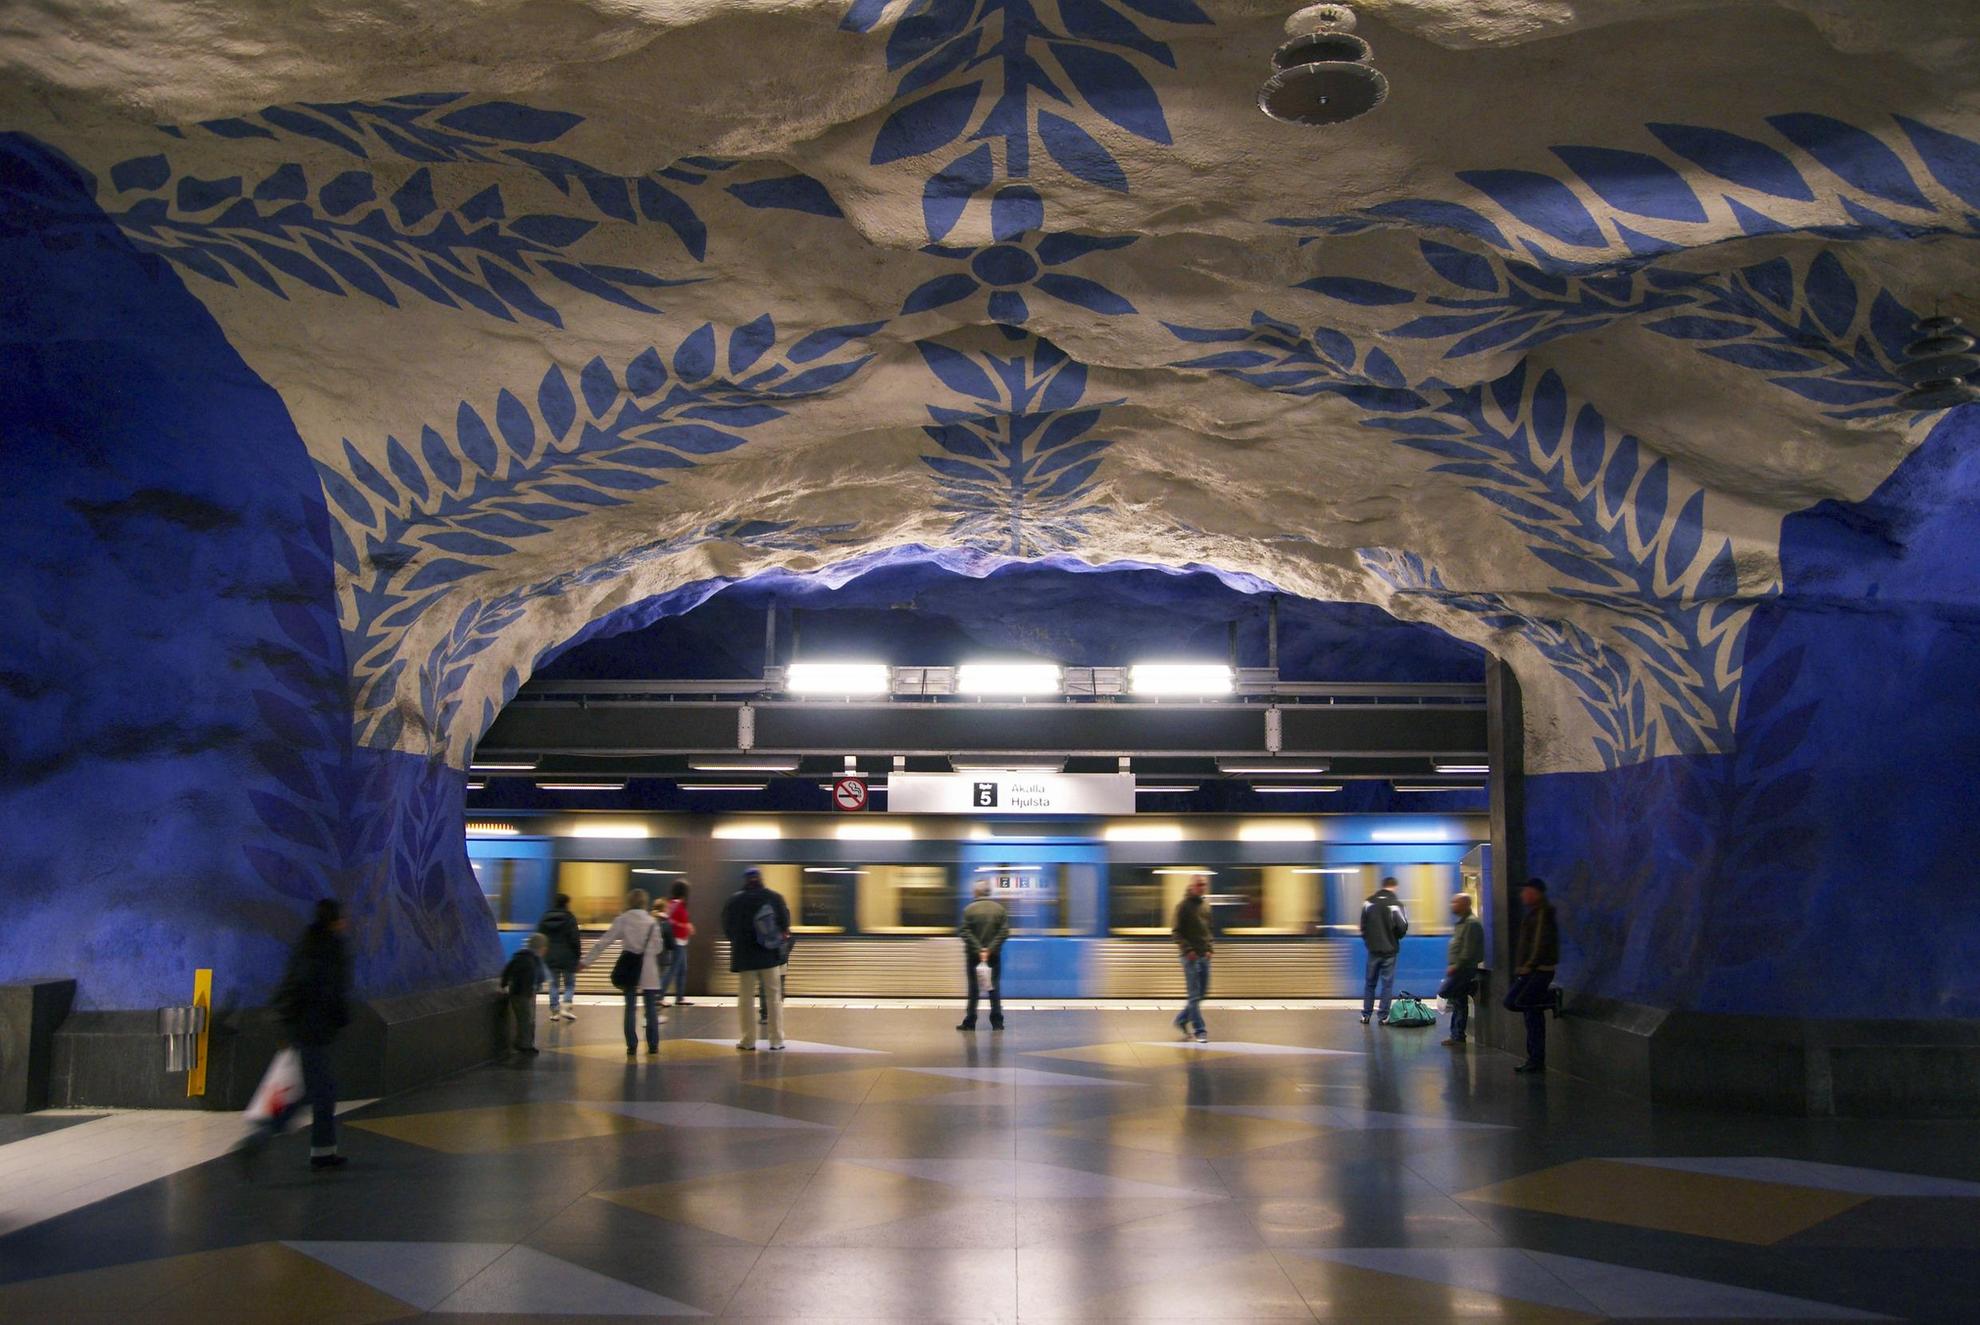 An artsy blue and white underground metro station in Stockholm.